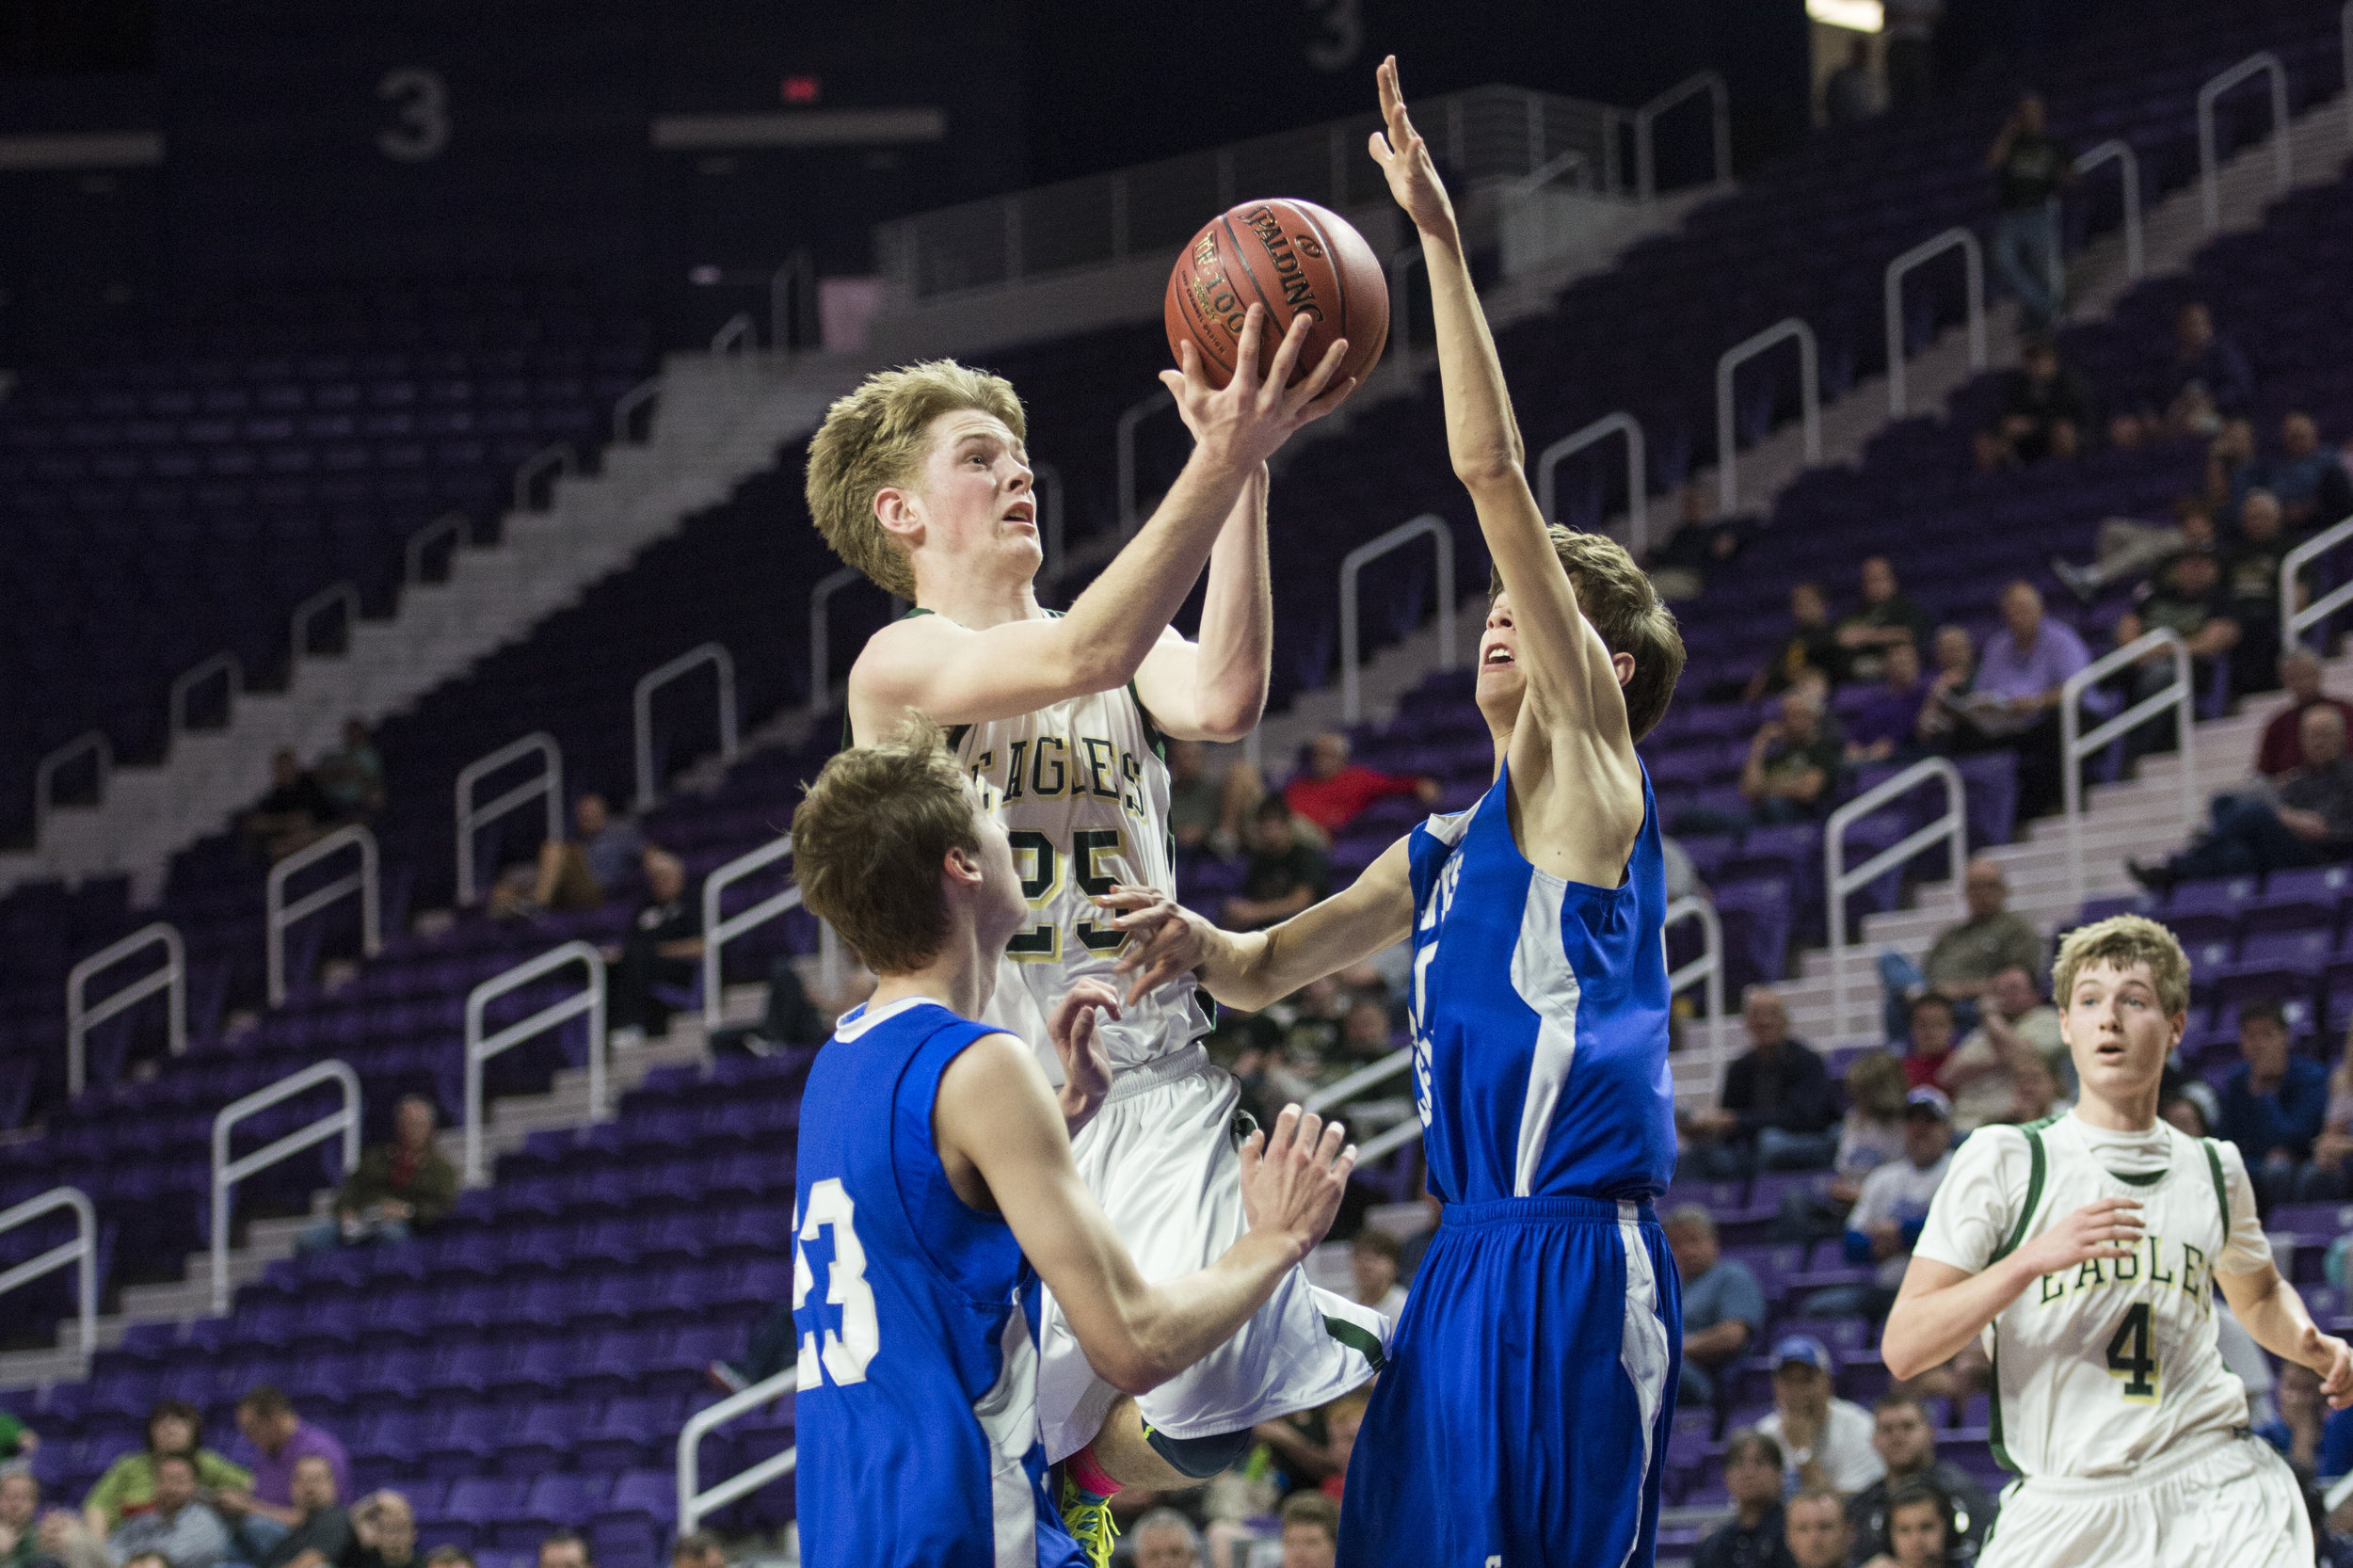 March 11, 2015 - Olpe vs. St. Mary's and Jackson Heights vs. Central Plains (Edited & Compressed)_0072.jpg